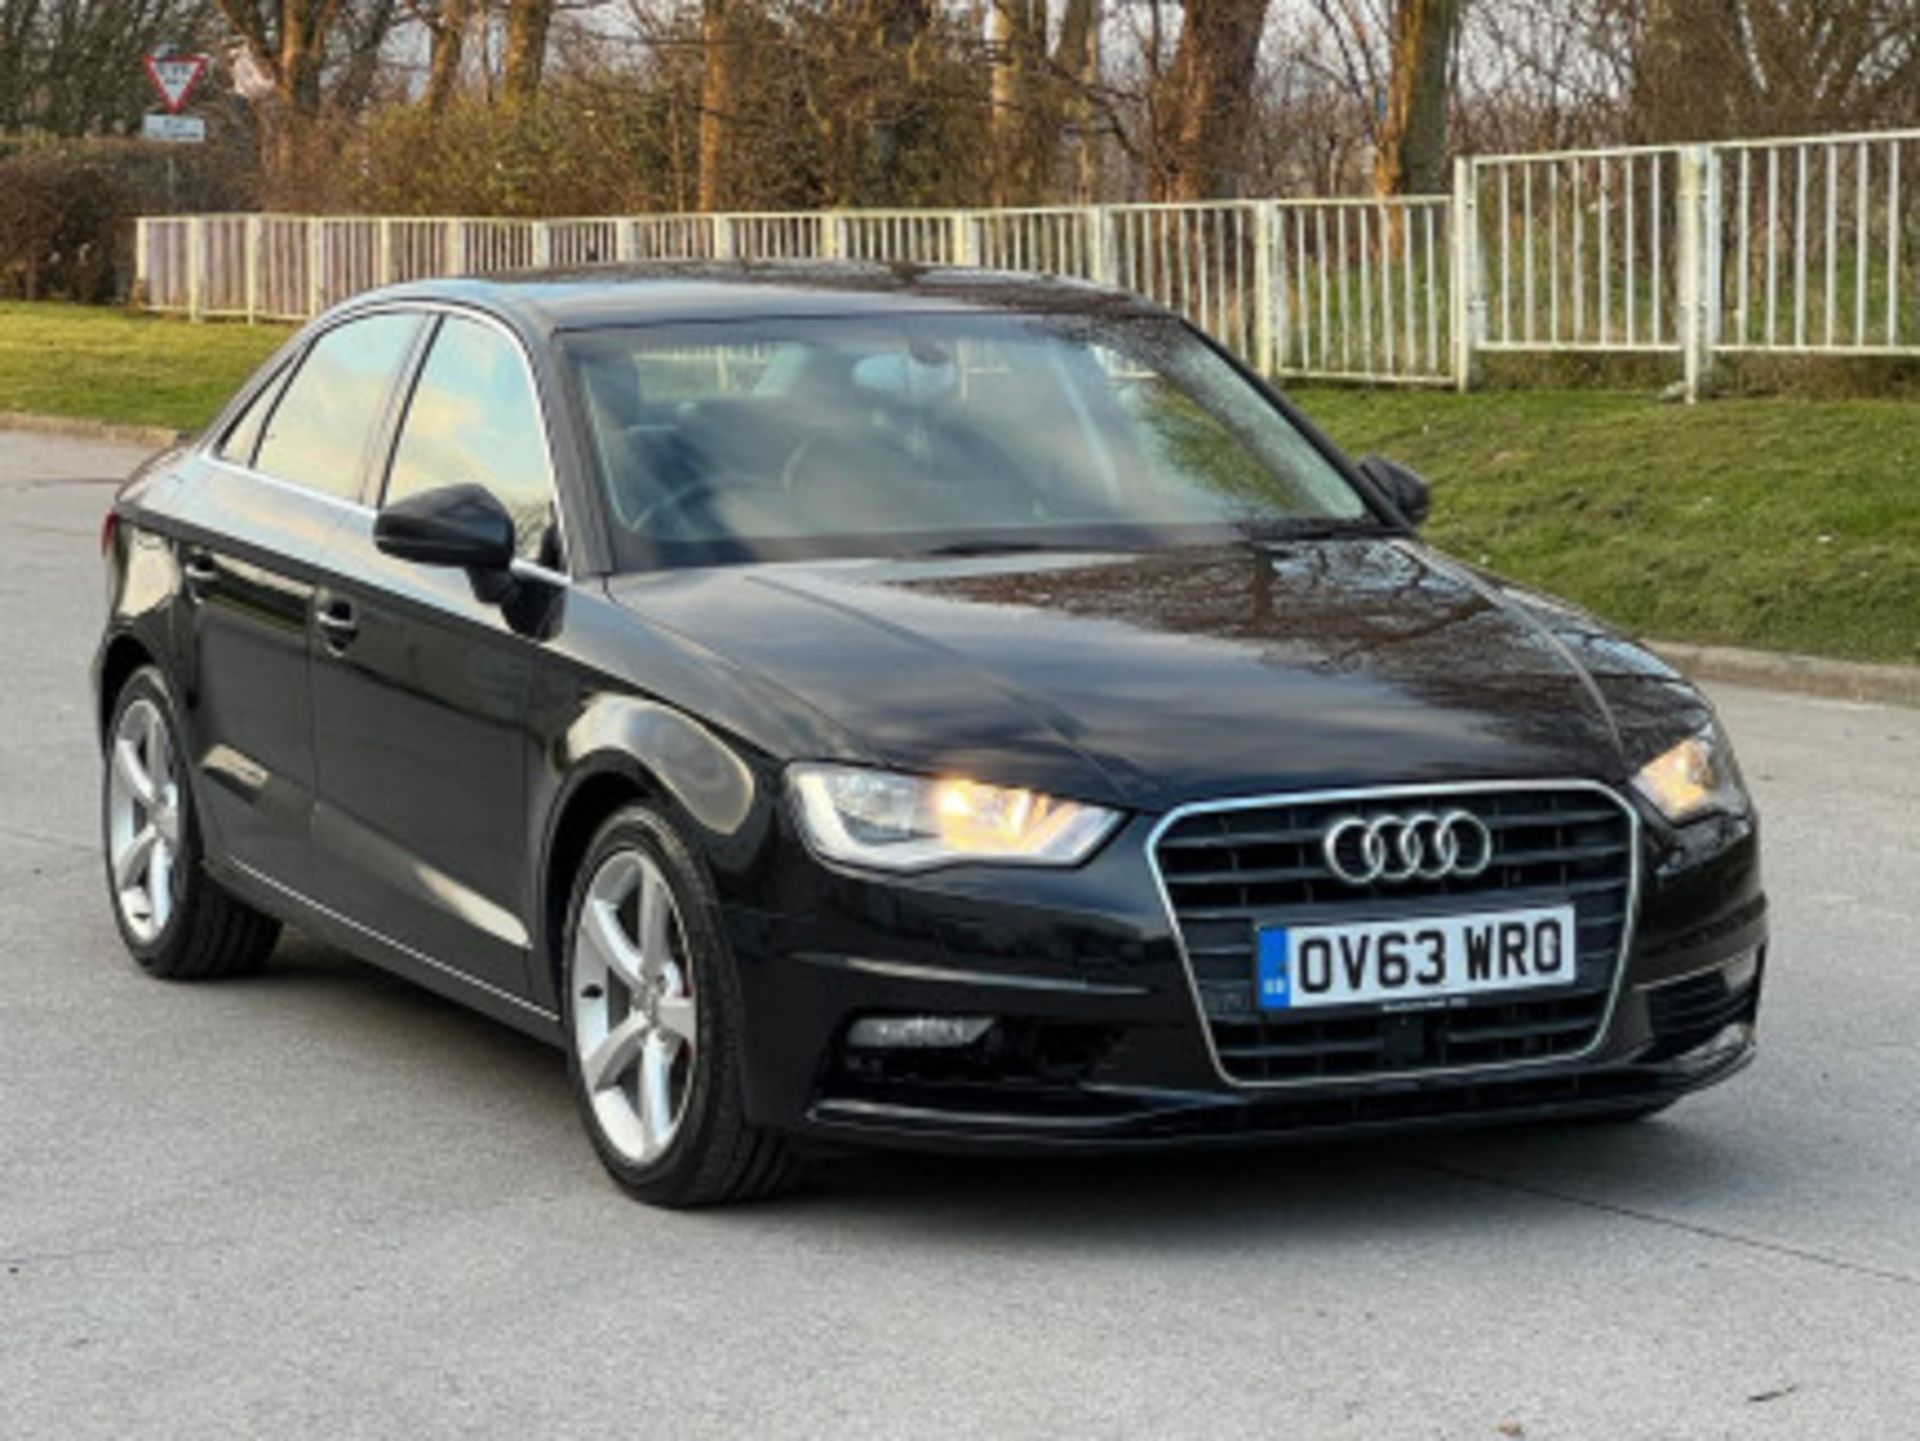 AUDI A3 2.0TDI SPORTBACK - STYLE, PERFORMANCE, AND COMFORT COMBINED >>--NO VAT ON HAMMER--<< - Image 97 of 216